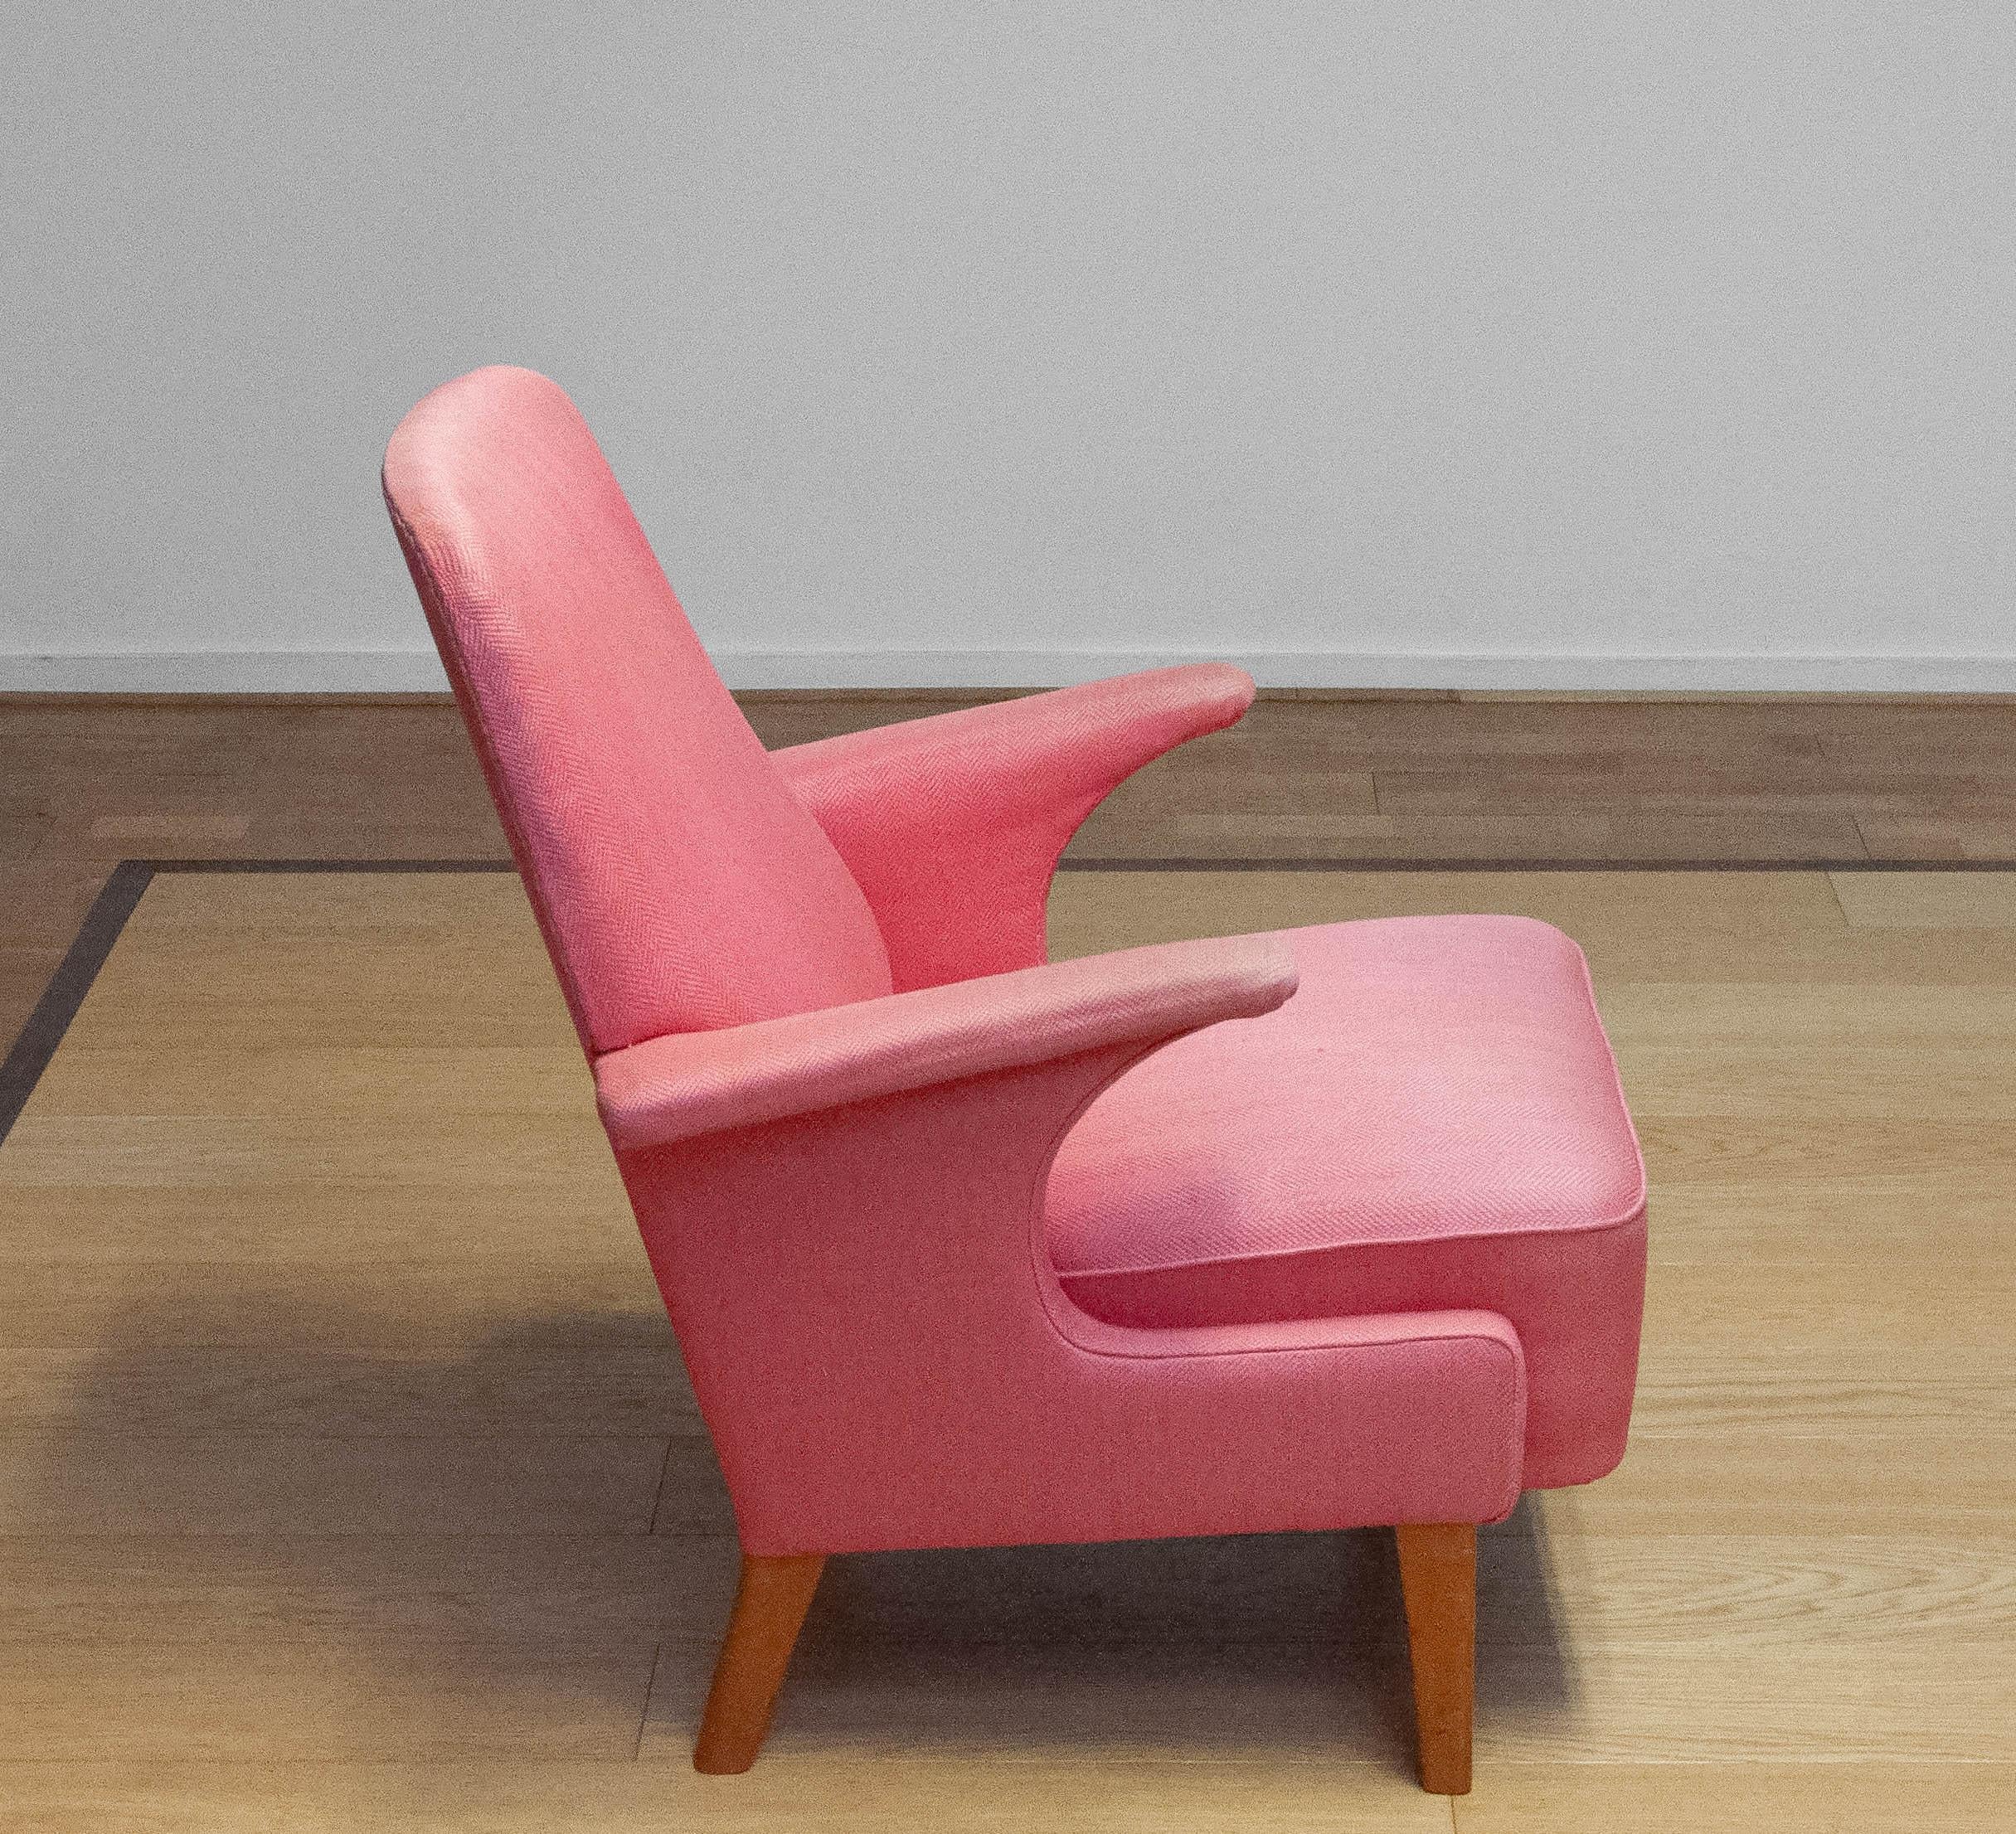 Swedish 1950 Armchair / Lounge Chair With Powder Pink Wool Upholstery By Dux From Sweden For Sale